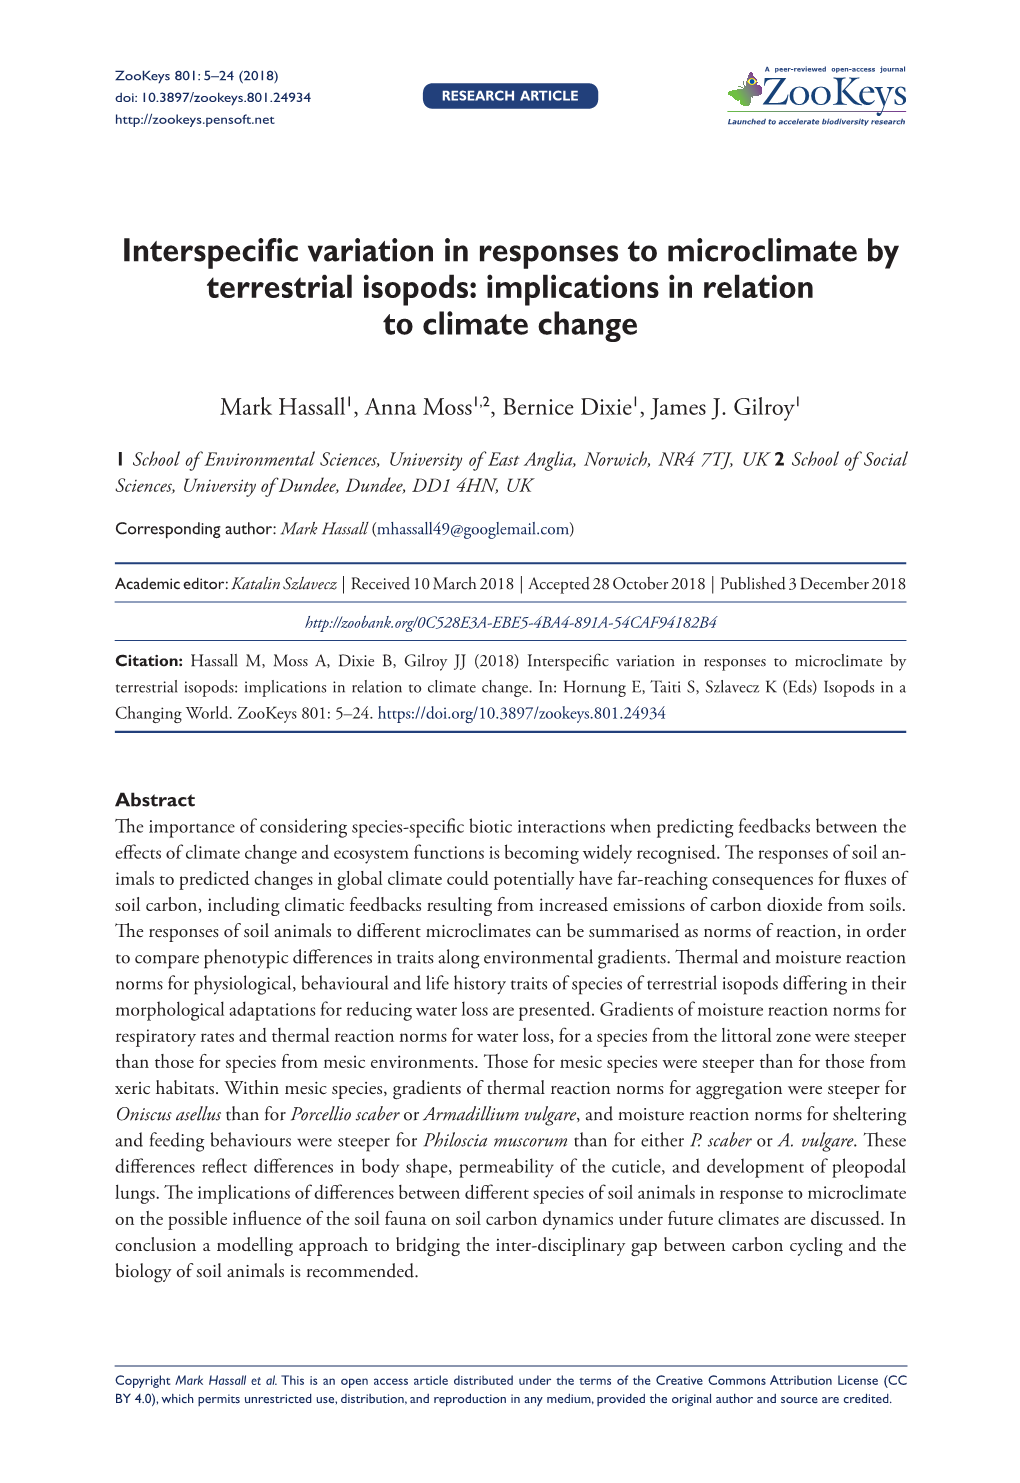 Interspecific Variation in Responses to Microclimate by Terrestrial Isopods: Implications in Relation to Climate Change